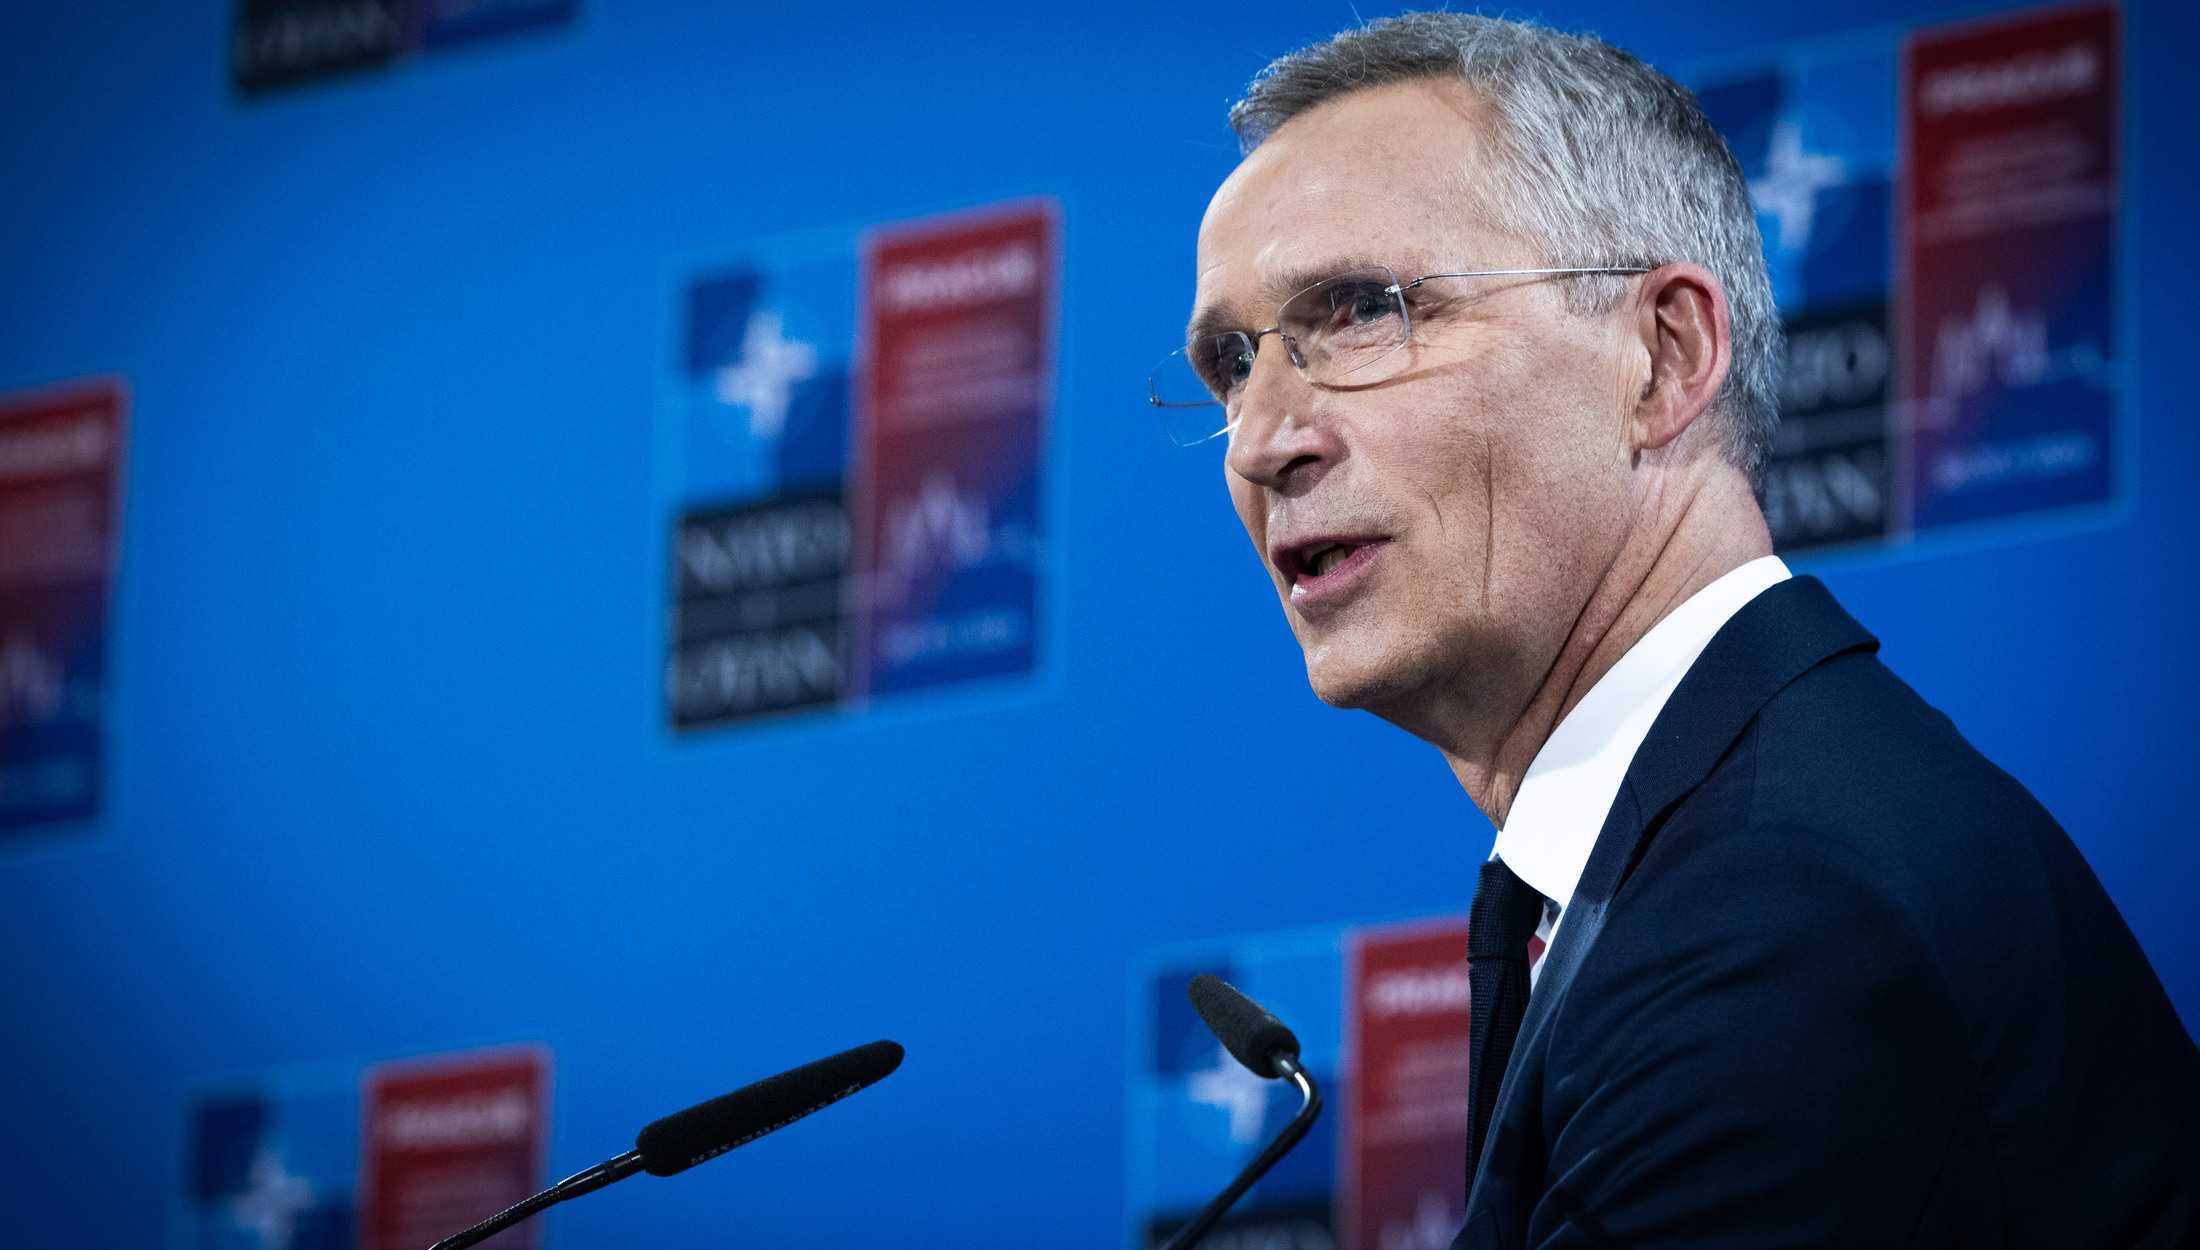 Stoltenberg ‘welcomes’ moves to allow Ukraine to ‘hit back’ inside Russian borders